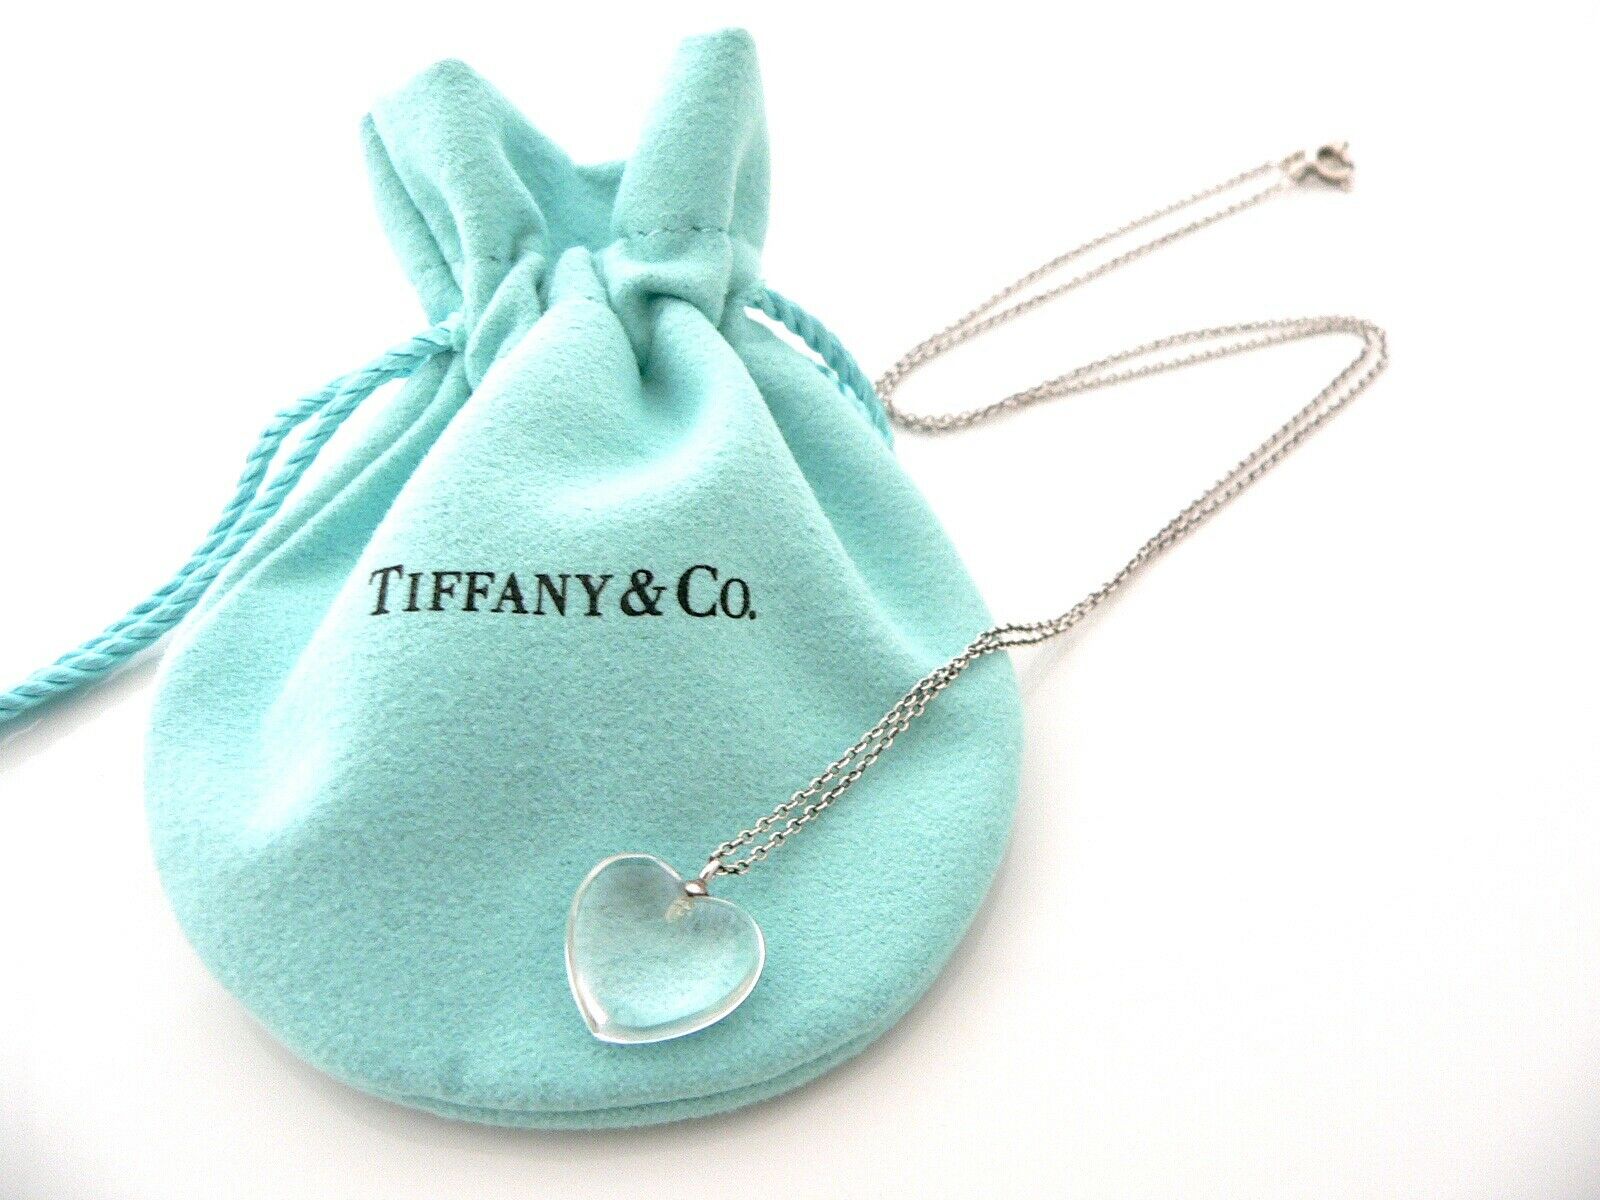 Tiffany & Co. Shopping Bag Charm Necklace - Sterling Silver Pendant Necklace,  Necklaces - TIF63577